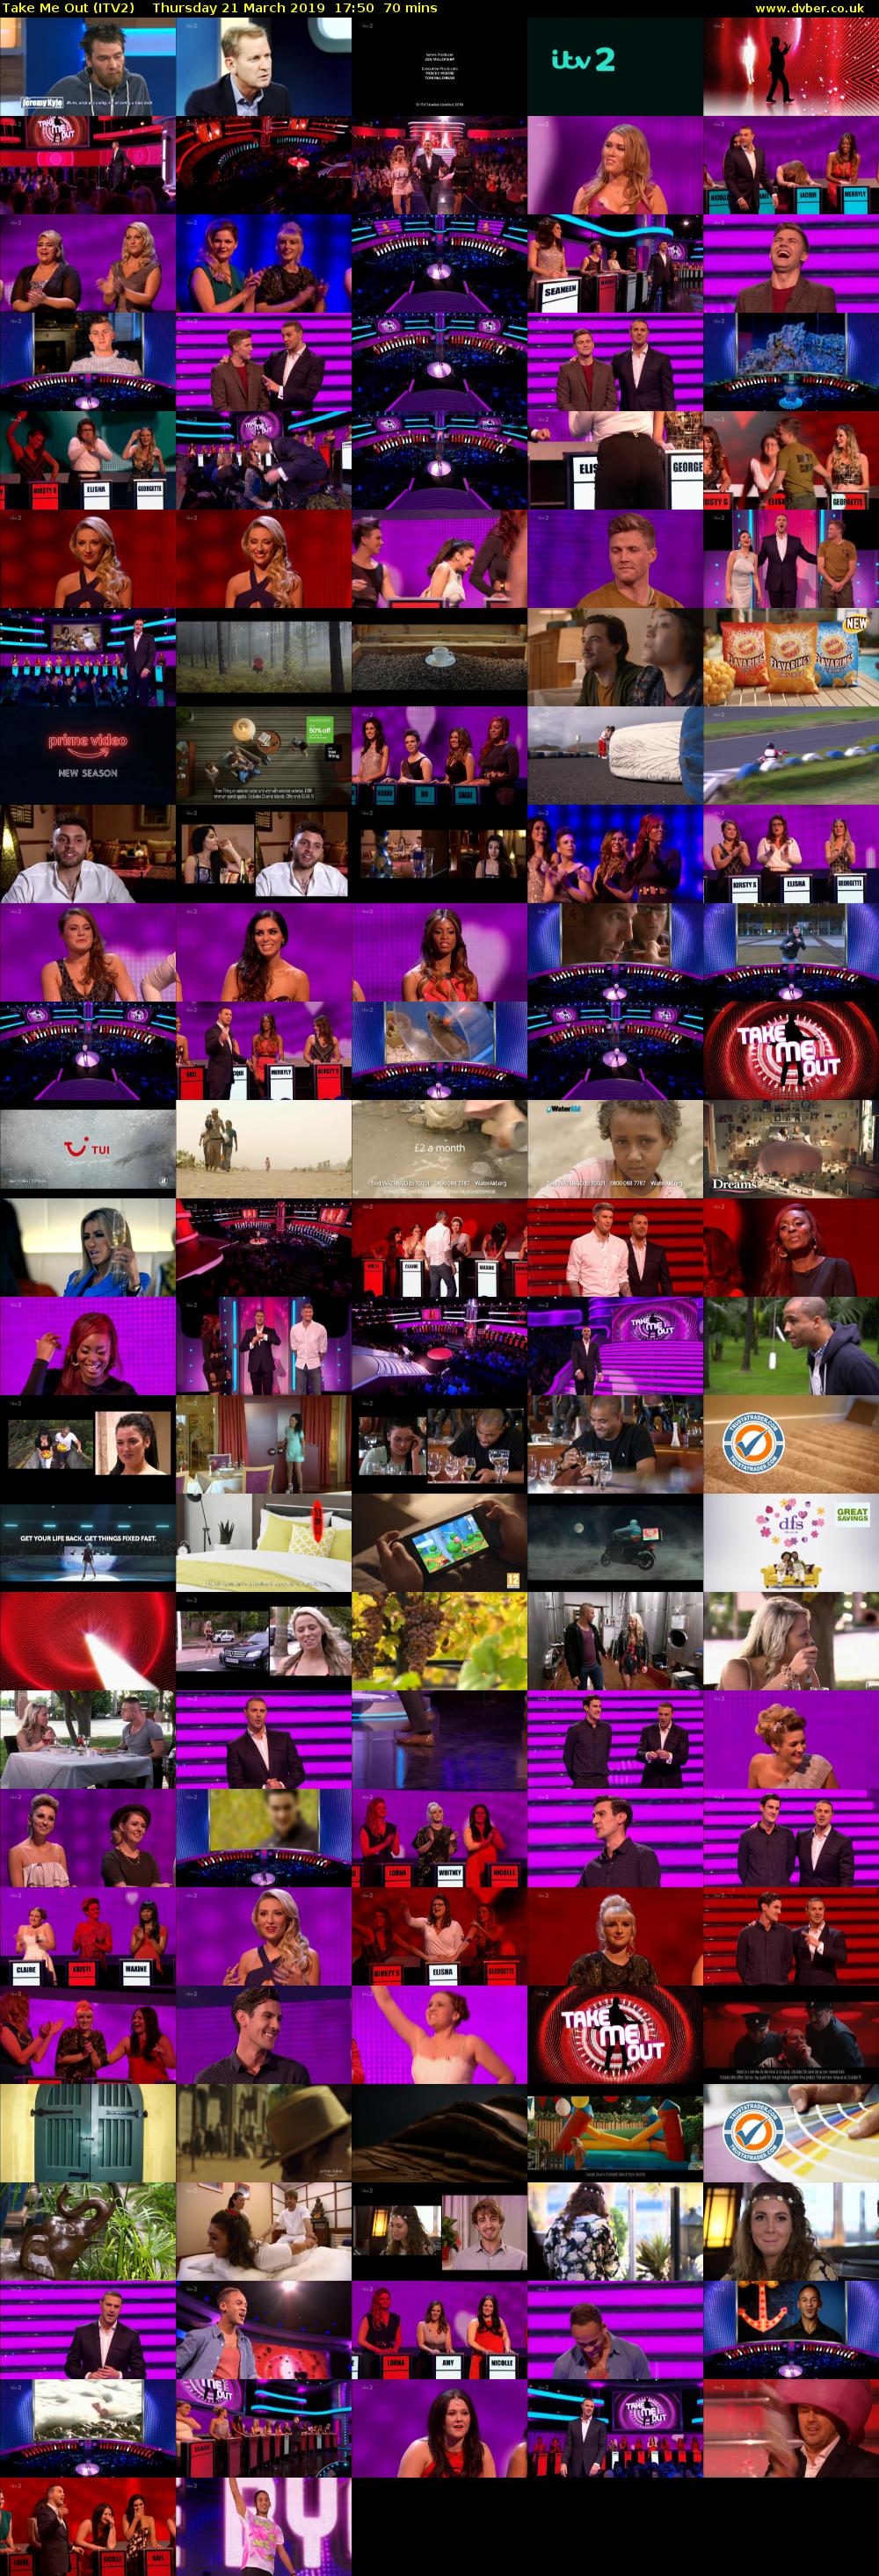 Take Me Out (ITV2) Thursday 21 March 2019 17:50 - 19:00